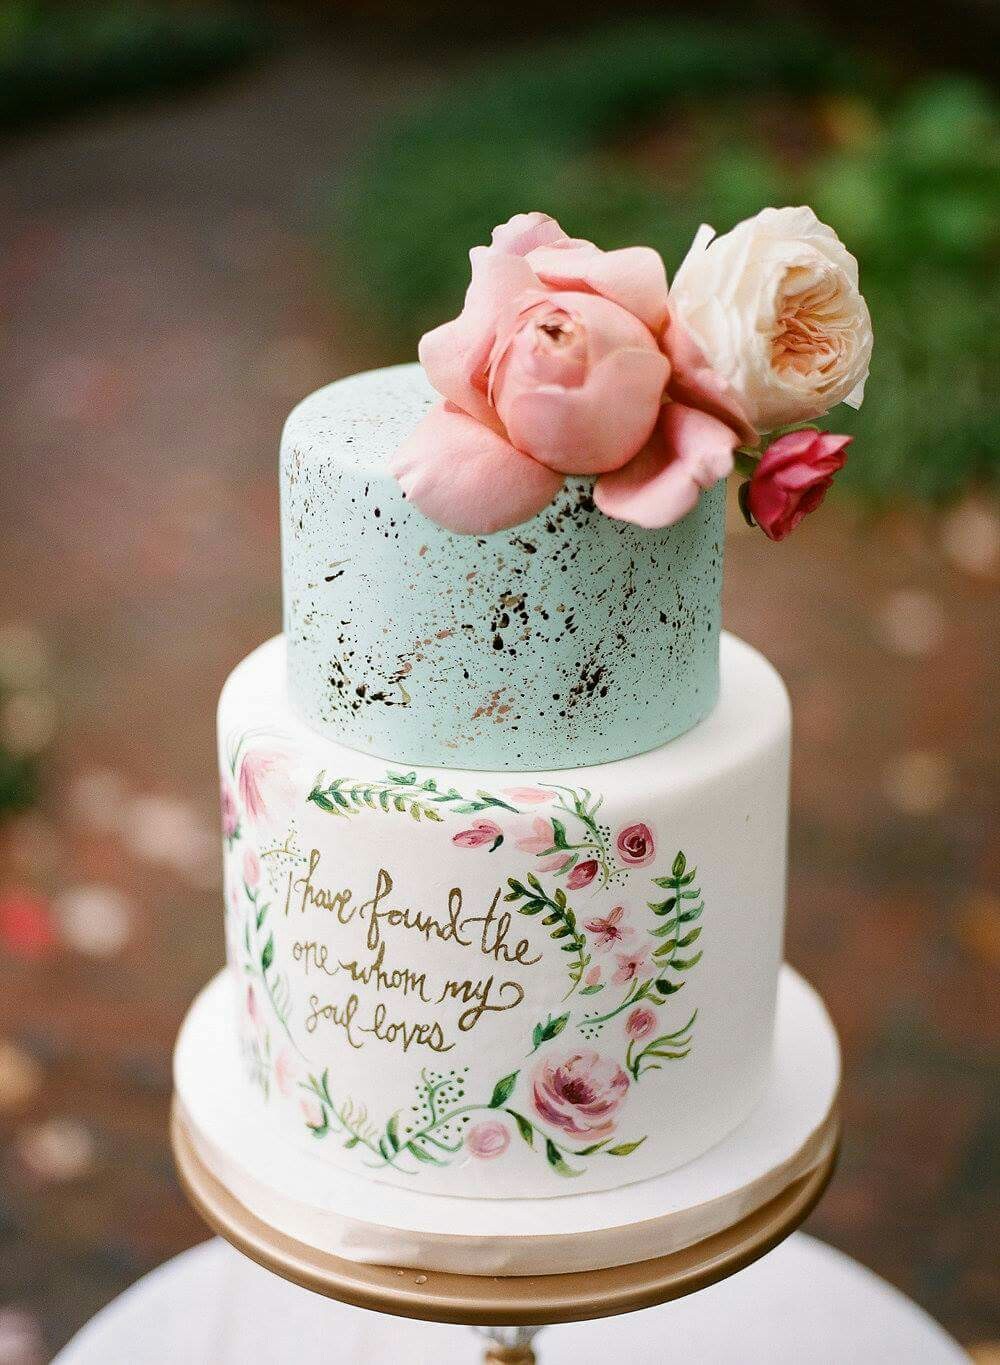 weddinginspirasi:
“Another pretty cake for the day~~
”